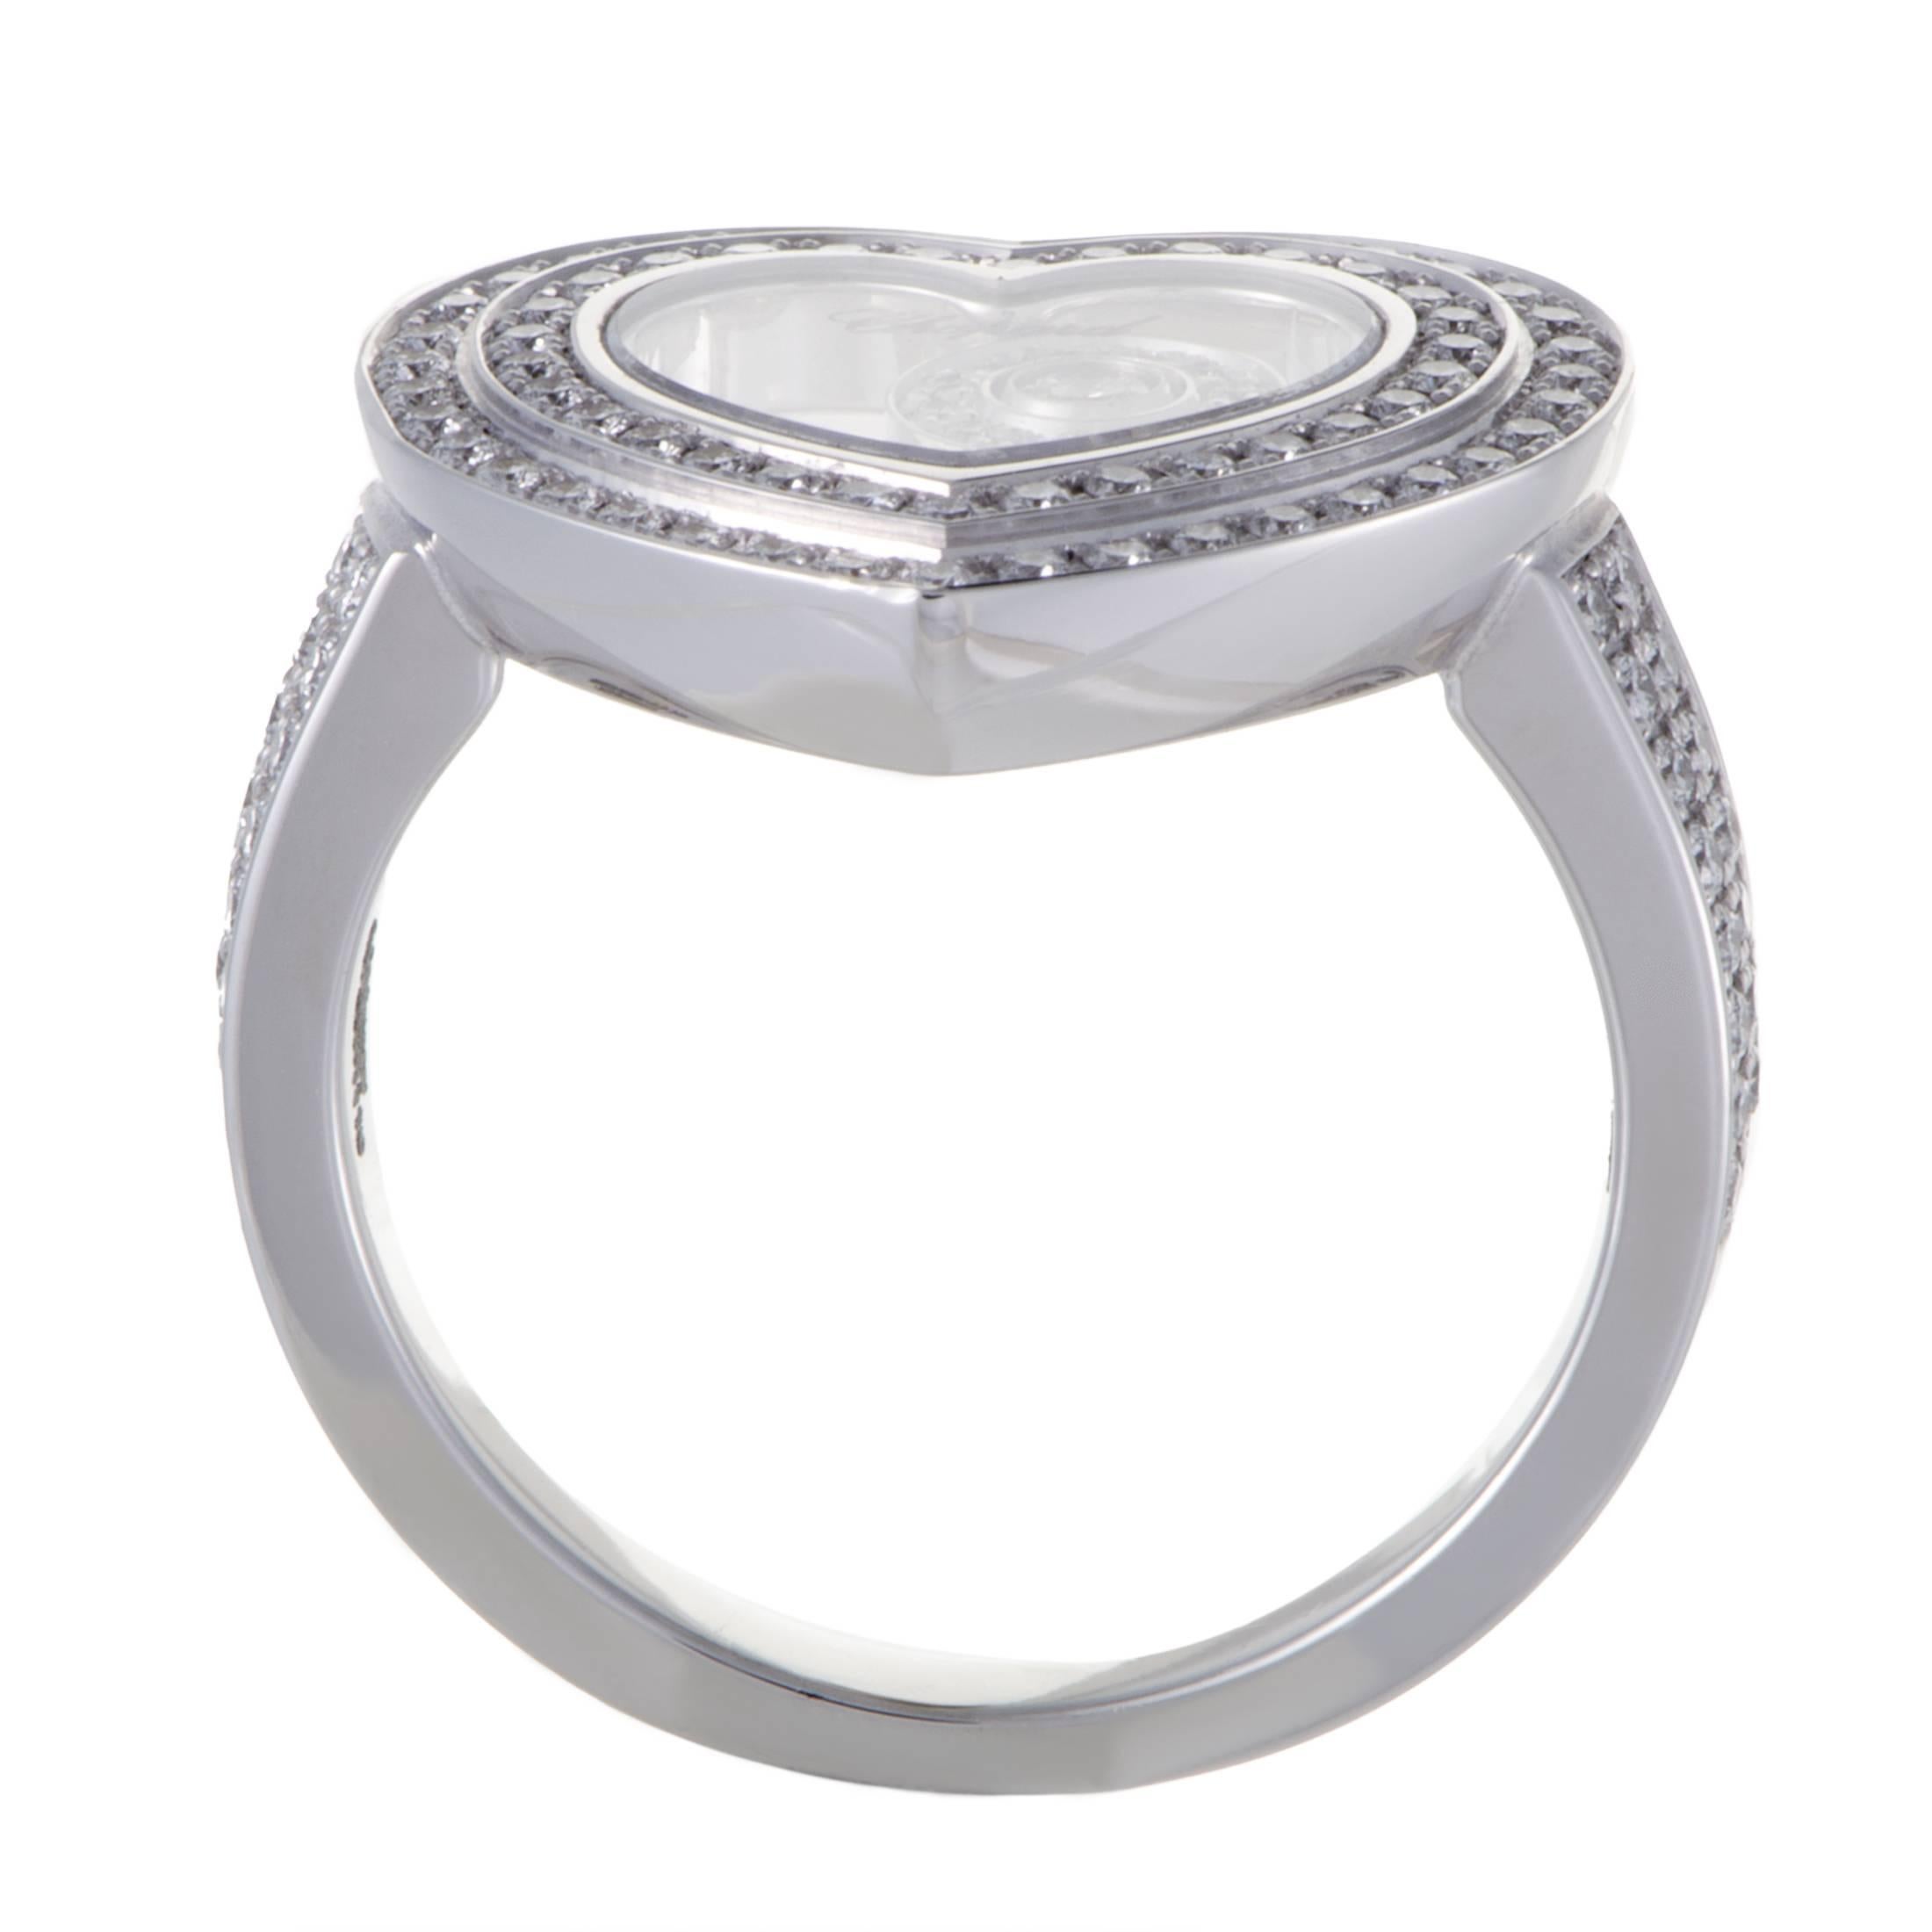 Designed in the iconic Chopard fashion that the brand is renowned for, this gorgeous ring offers an exceptionally stylish appearance that exudes elegance and femininity. The ring is crafted from gleaming 18K white gold, whose prestigious sheen acts